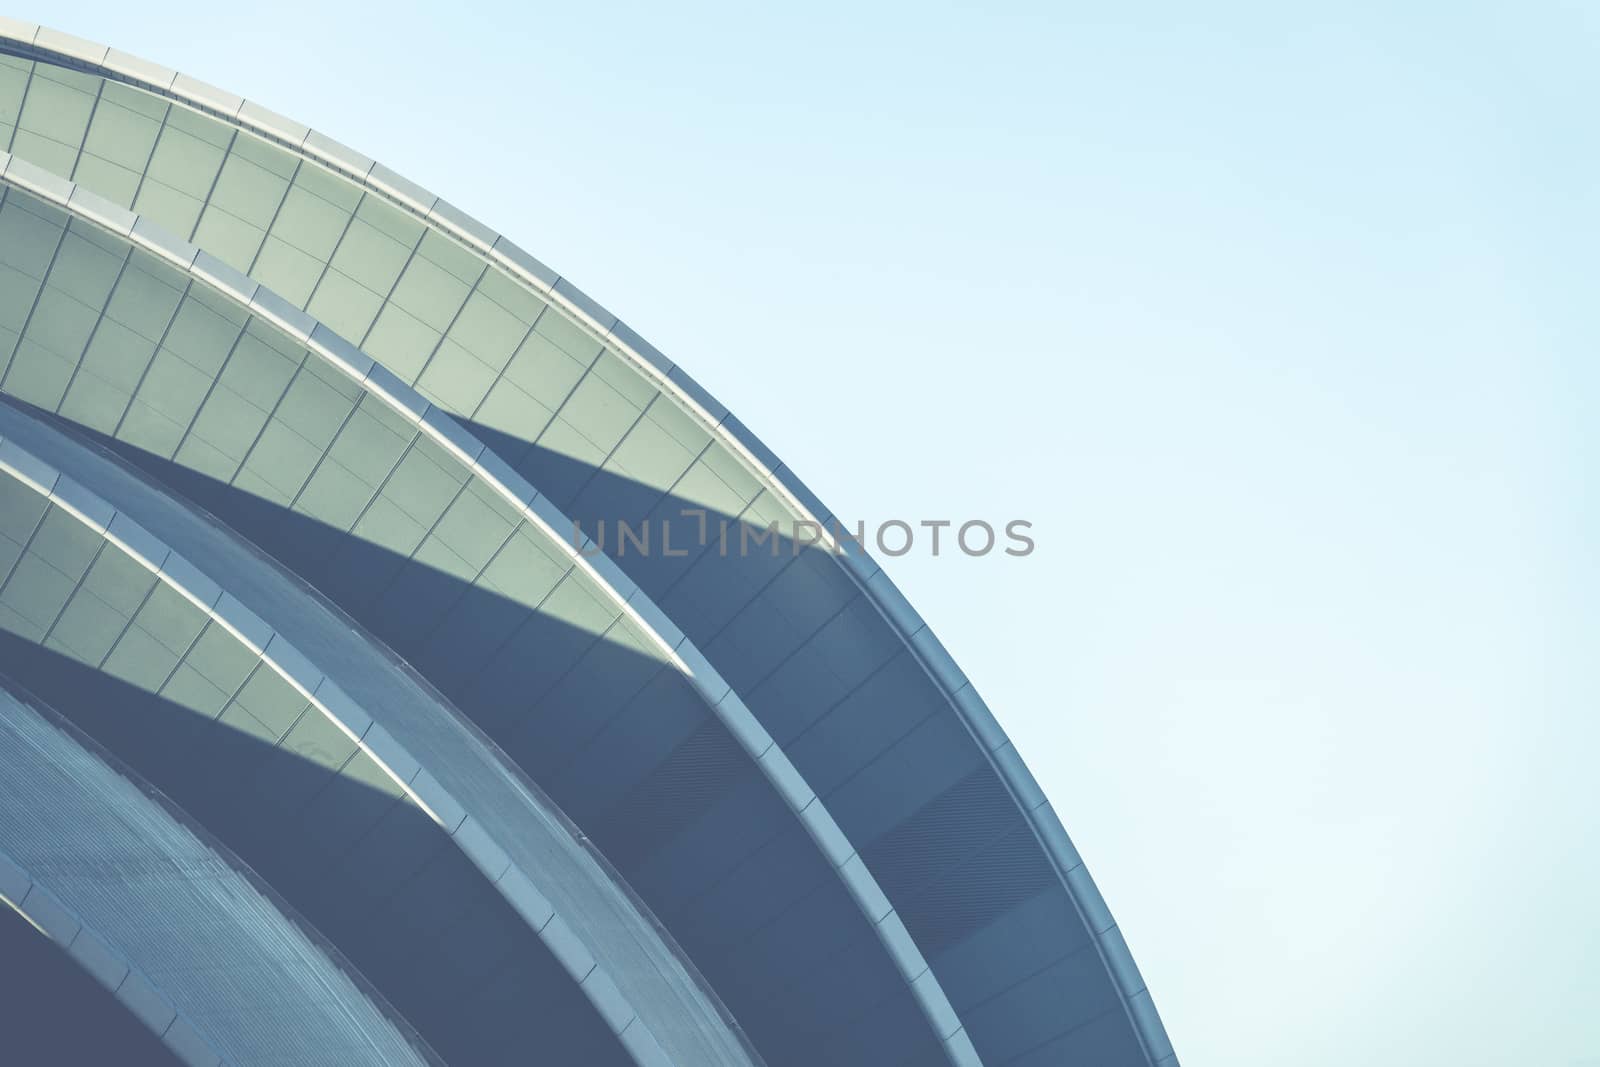 Curved Modern Architecture by mrdoomits